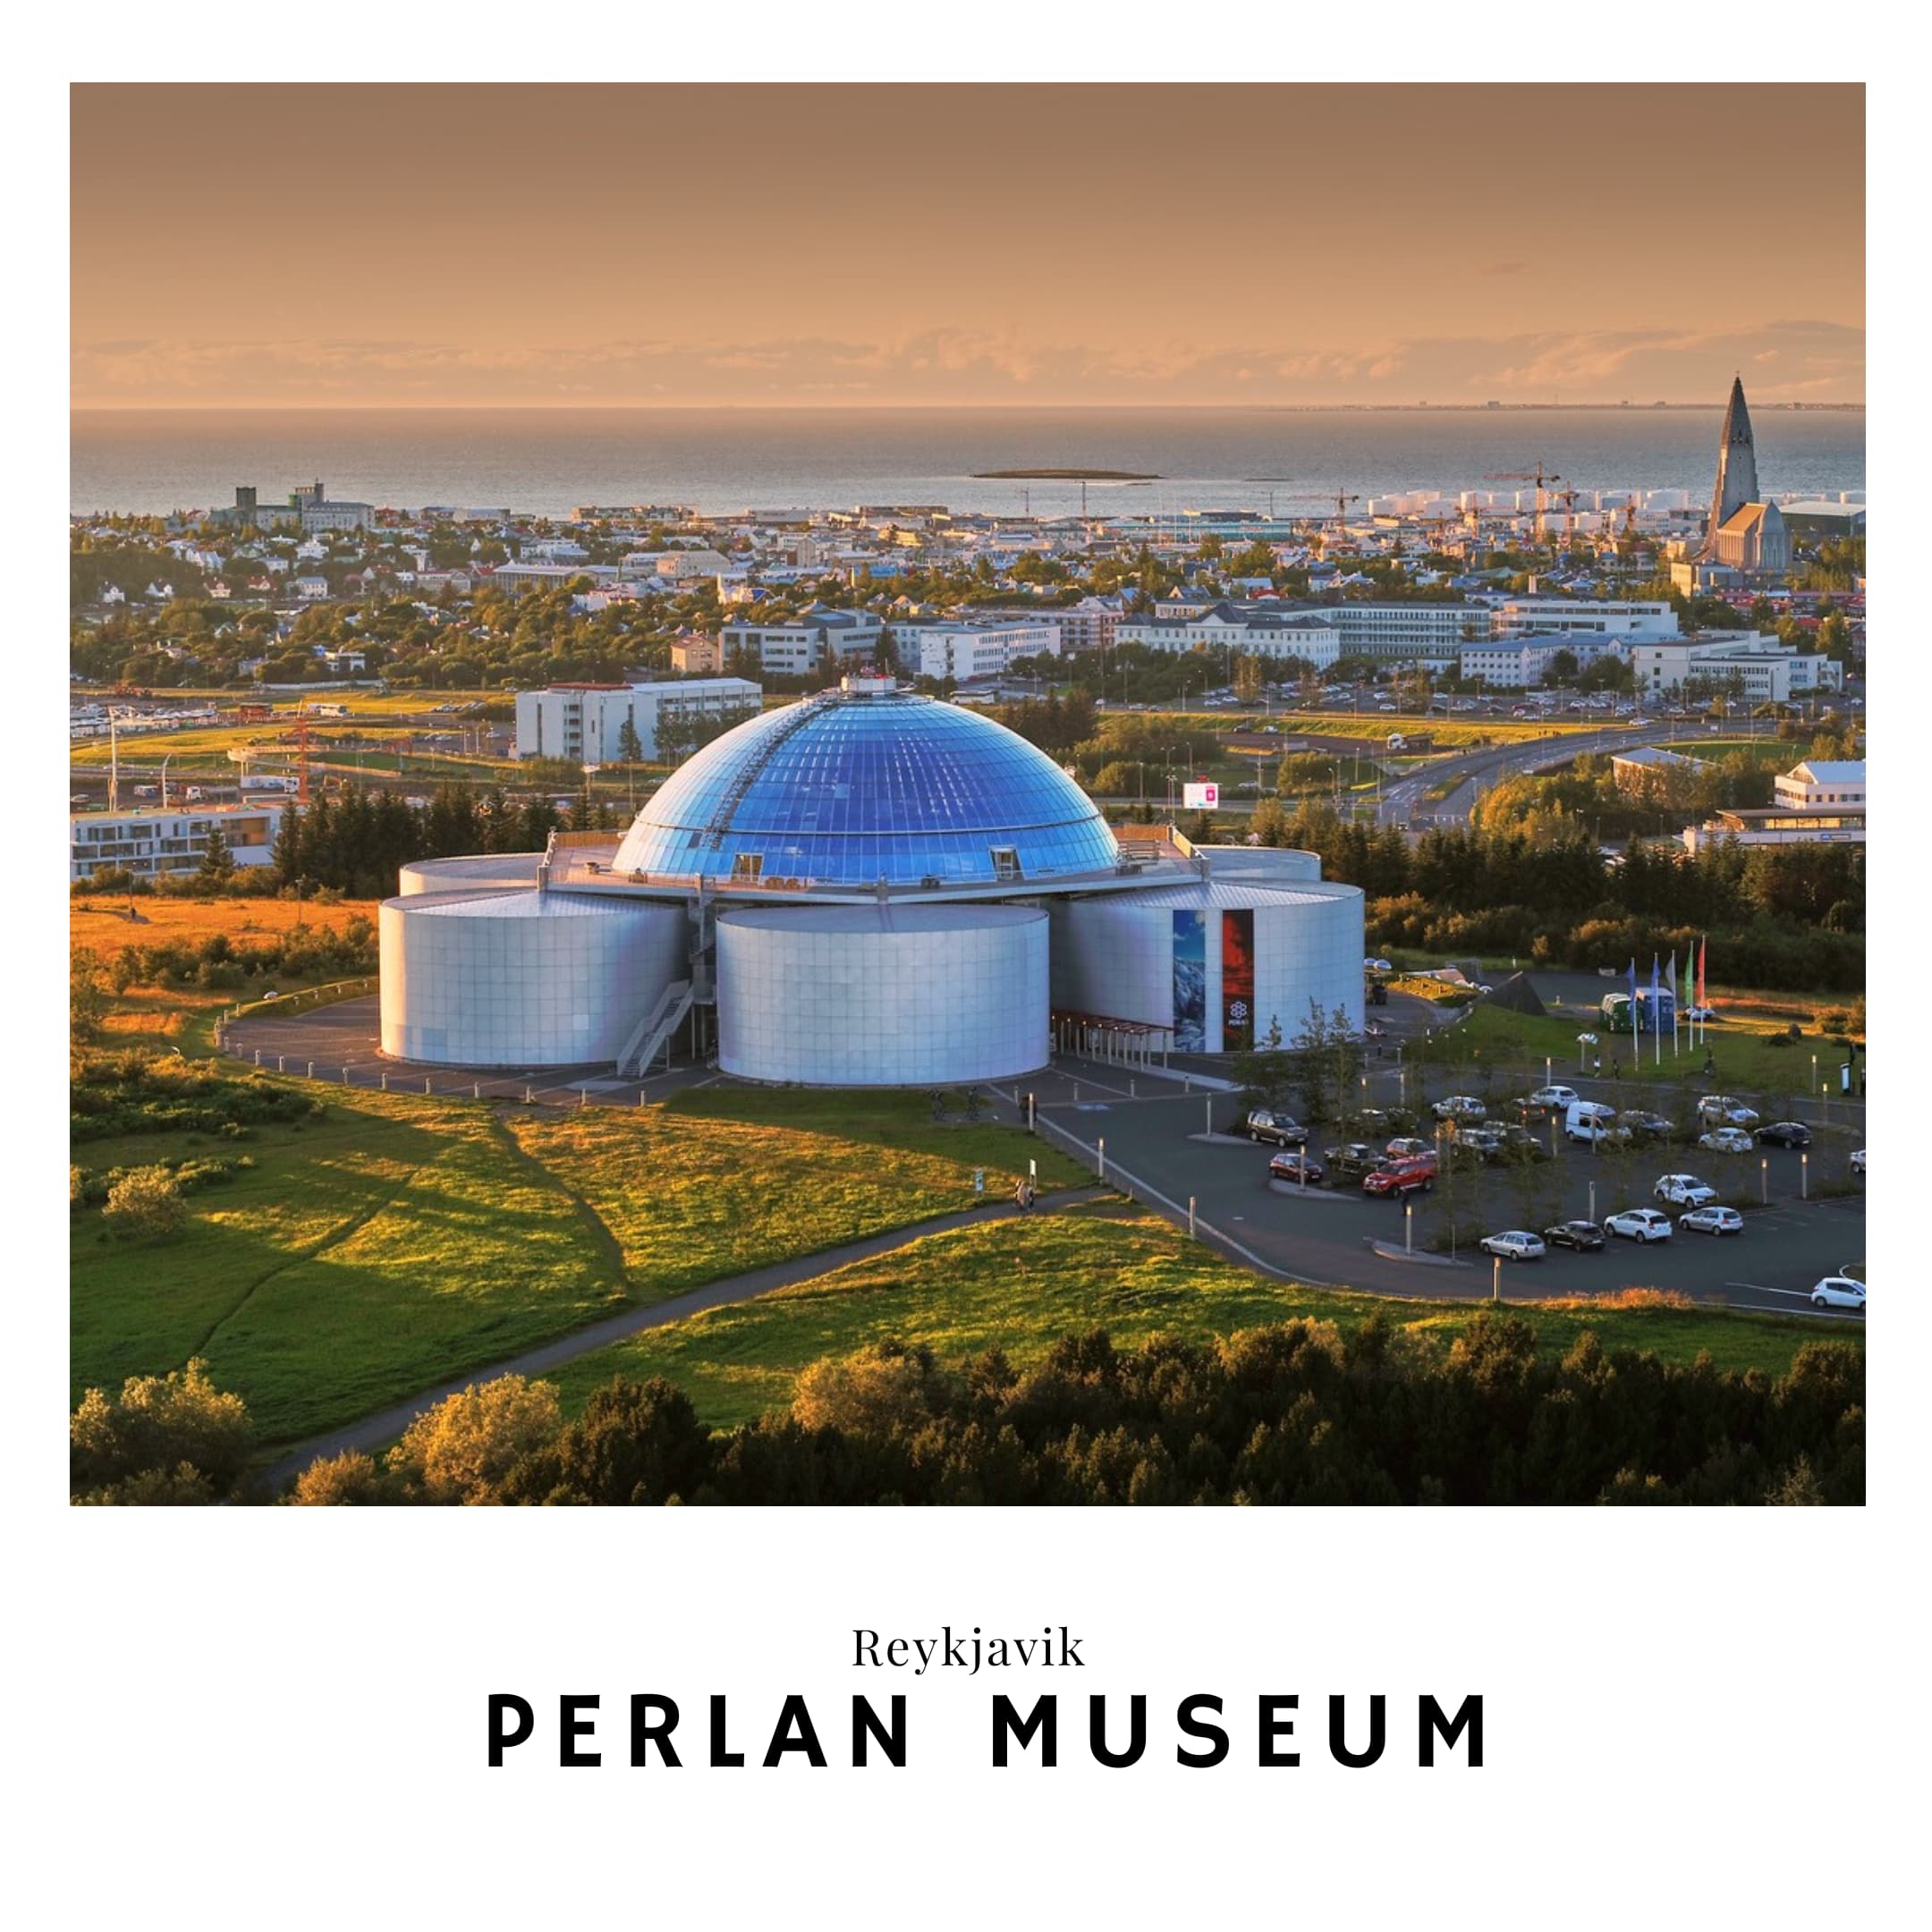 Link to the Perlan Museum Travel Guide in Iceland Reykjavik